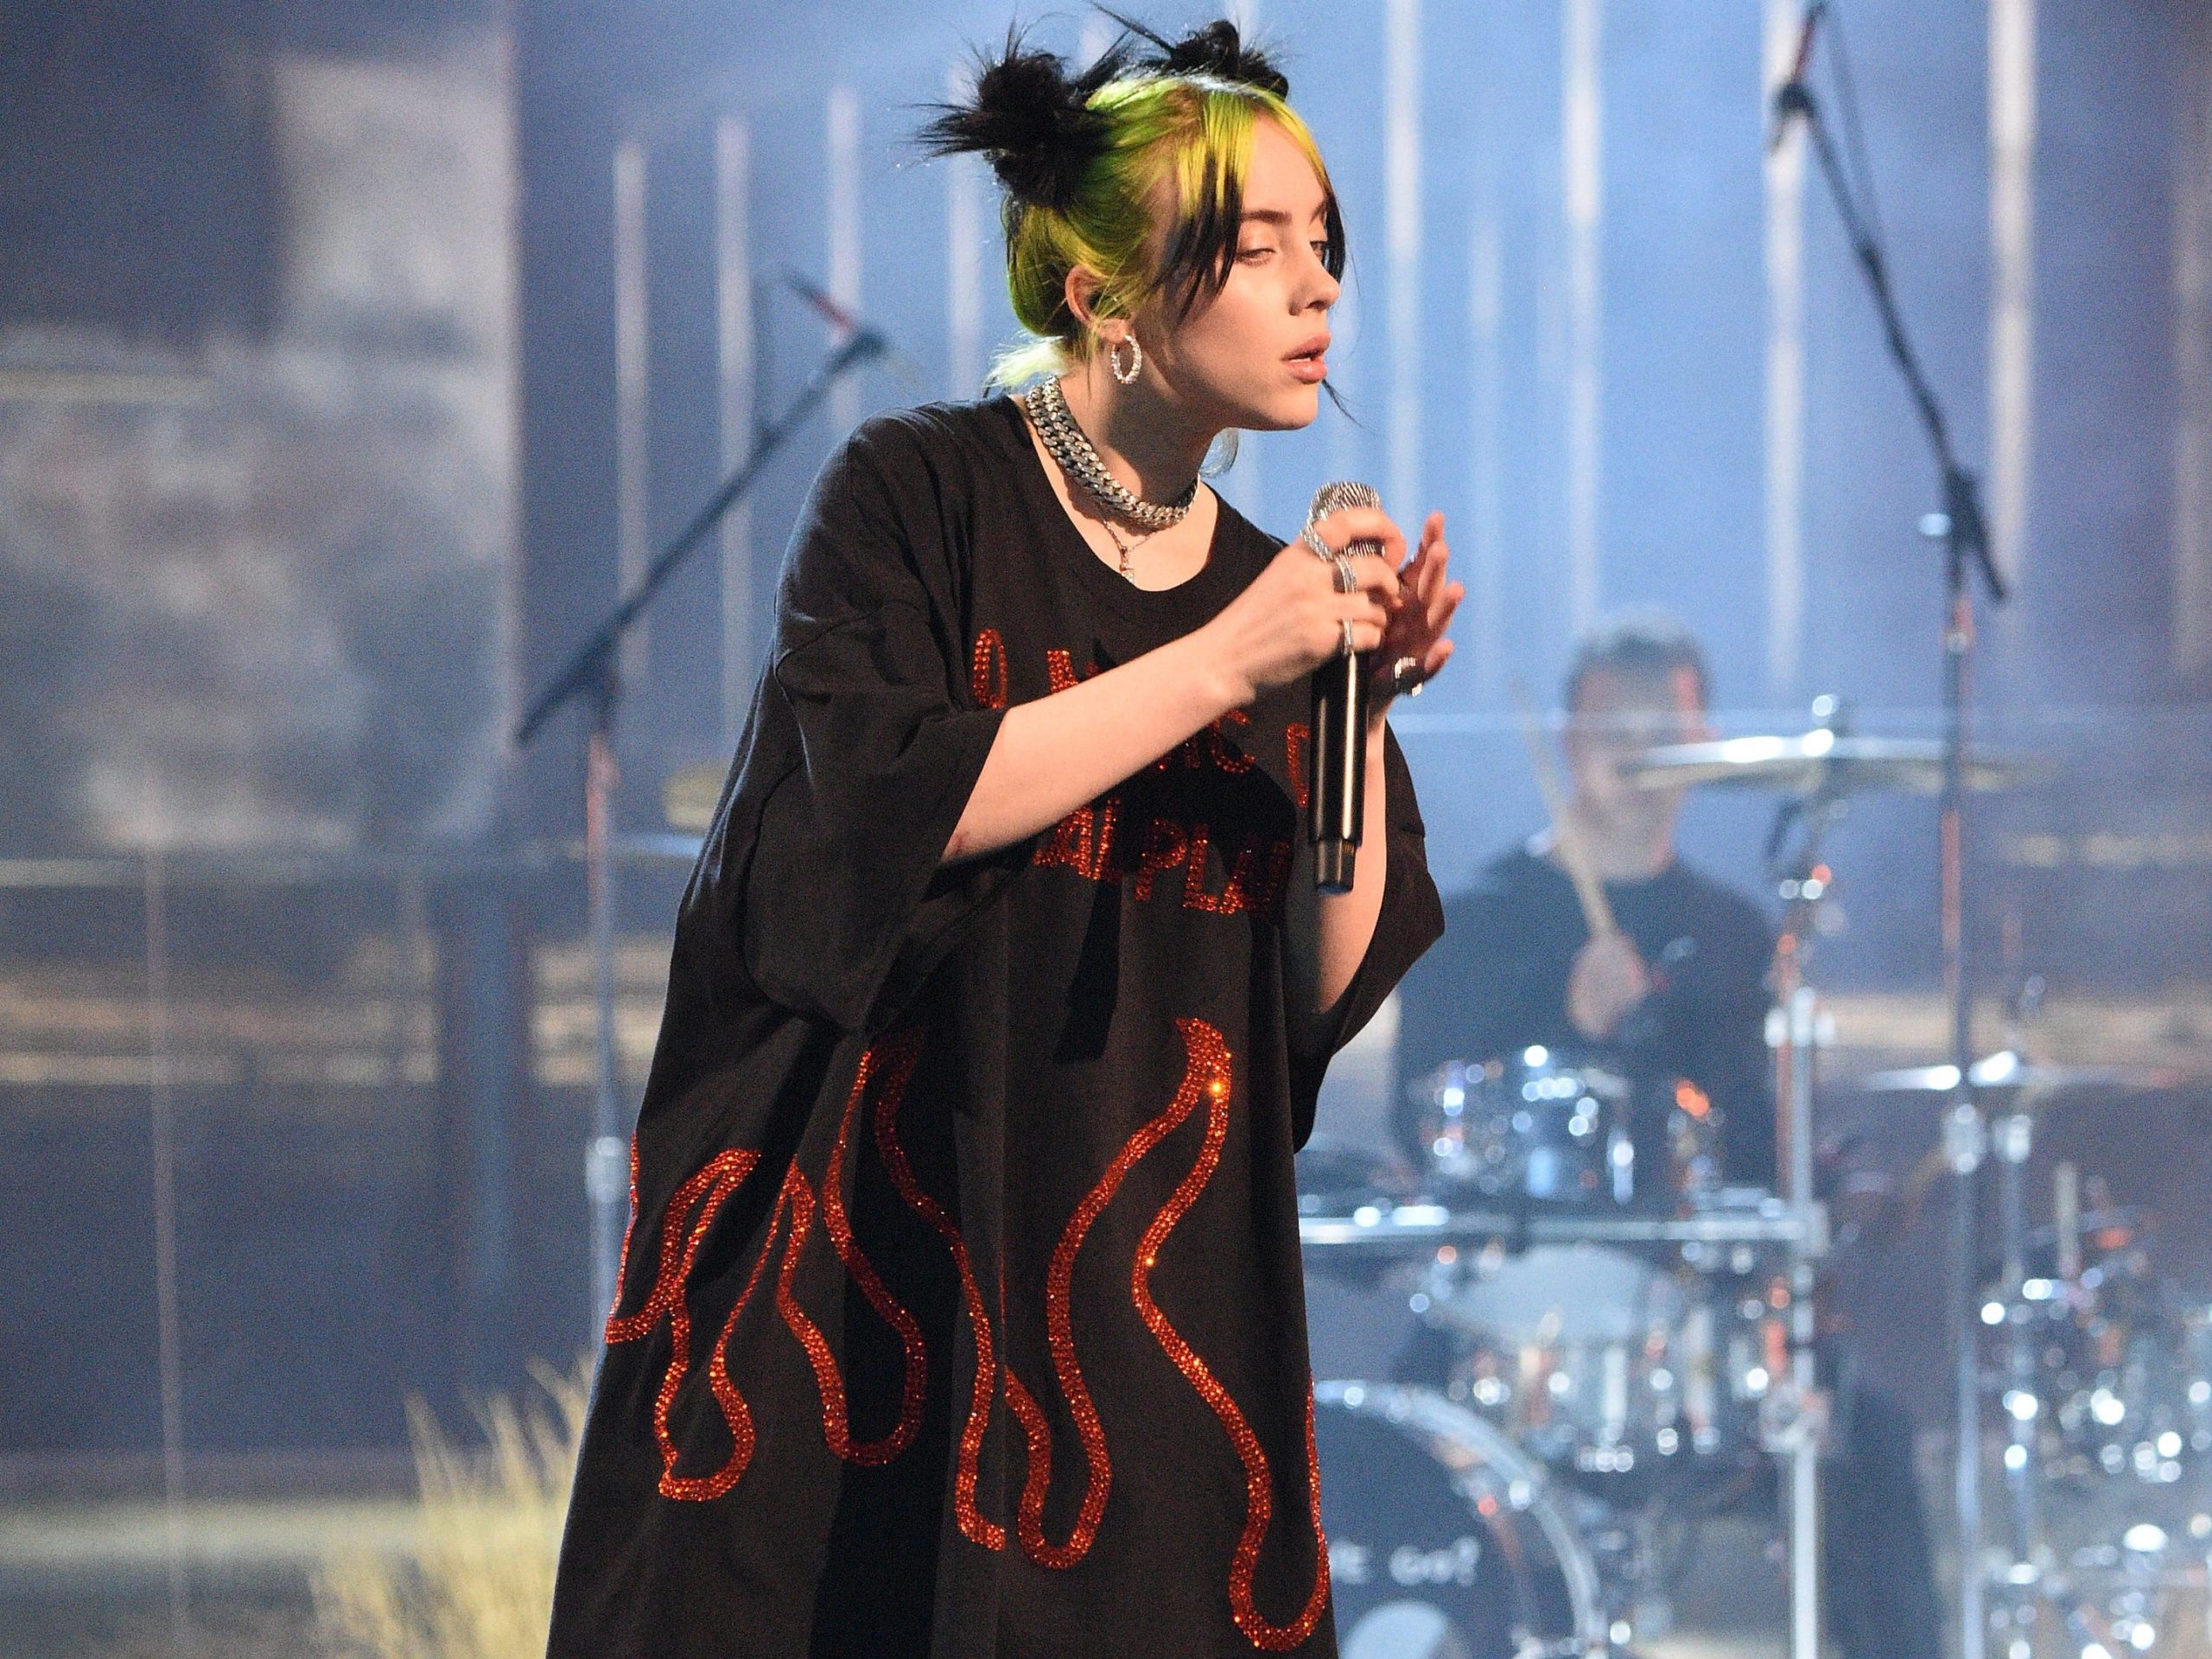 Billie Eilish performs at the American Music Awards in 2019.